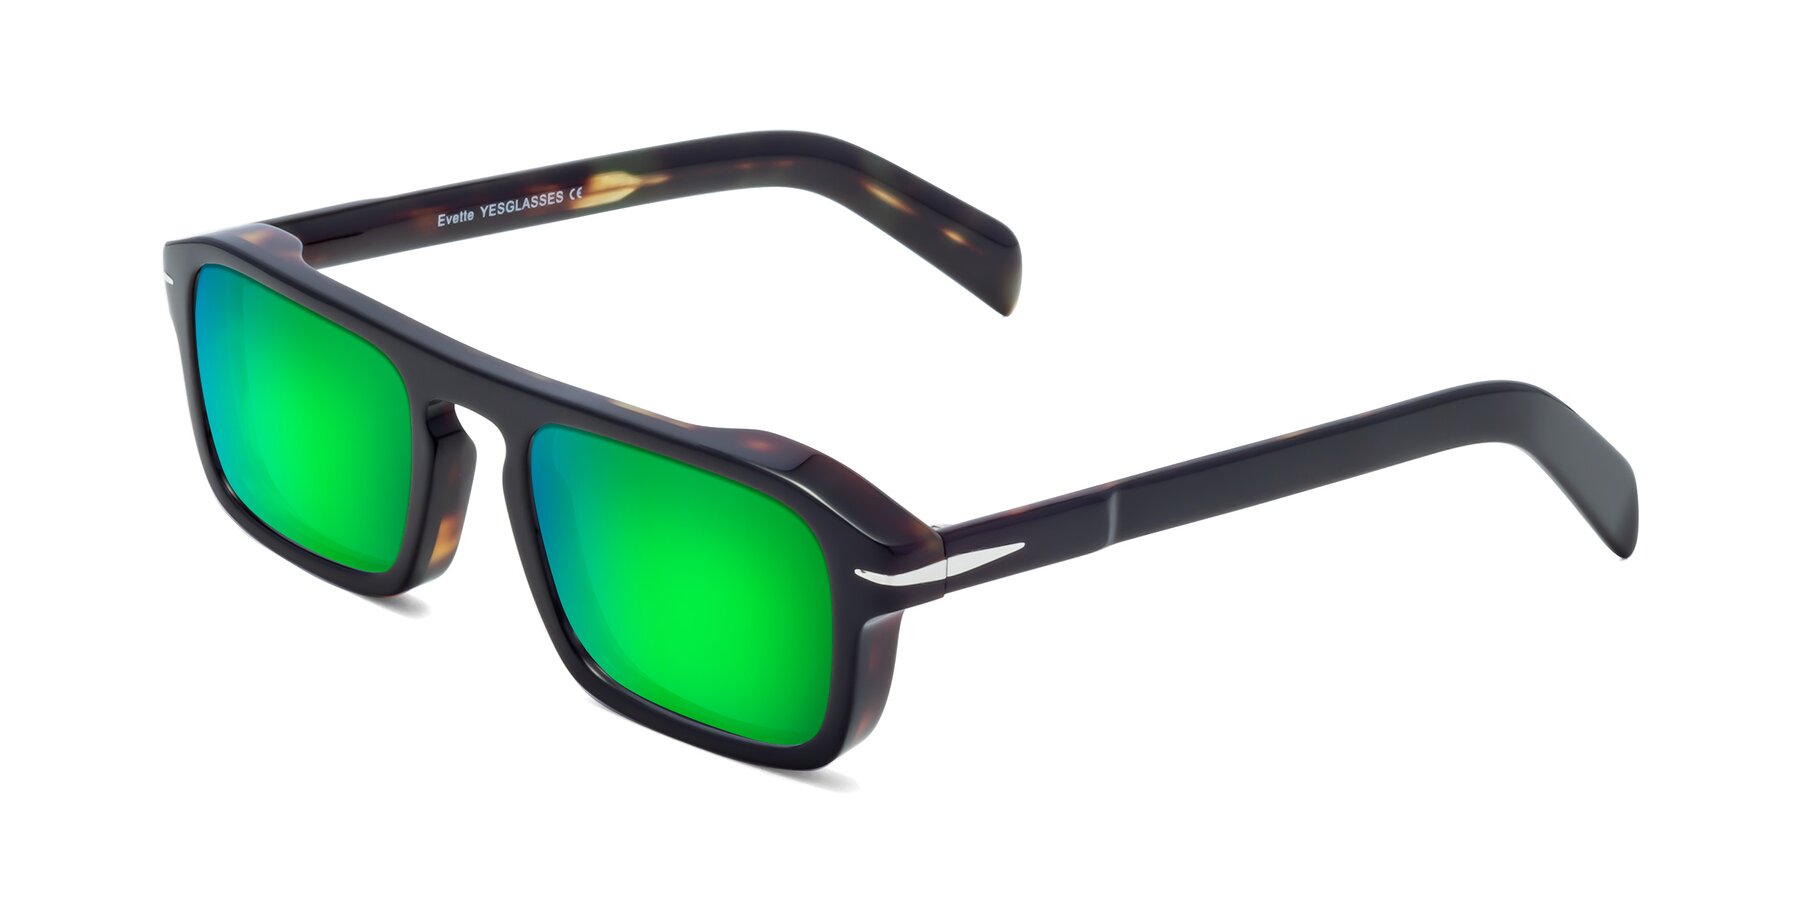 Angle of Evette in Black-Tortoise with Green Mirrored Lenses